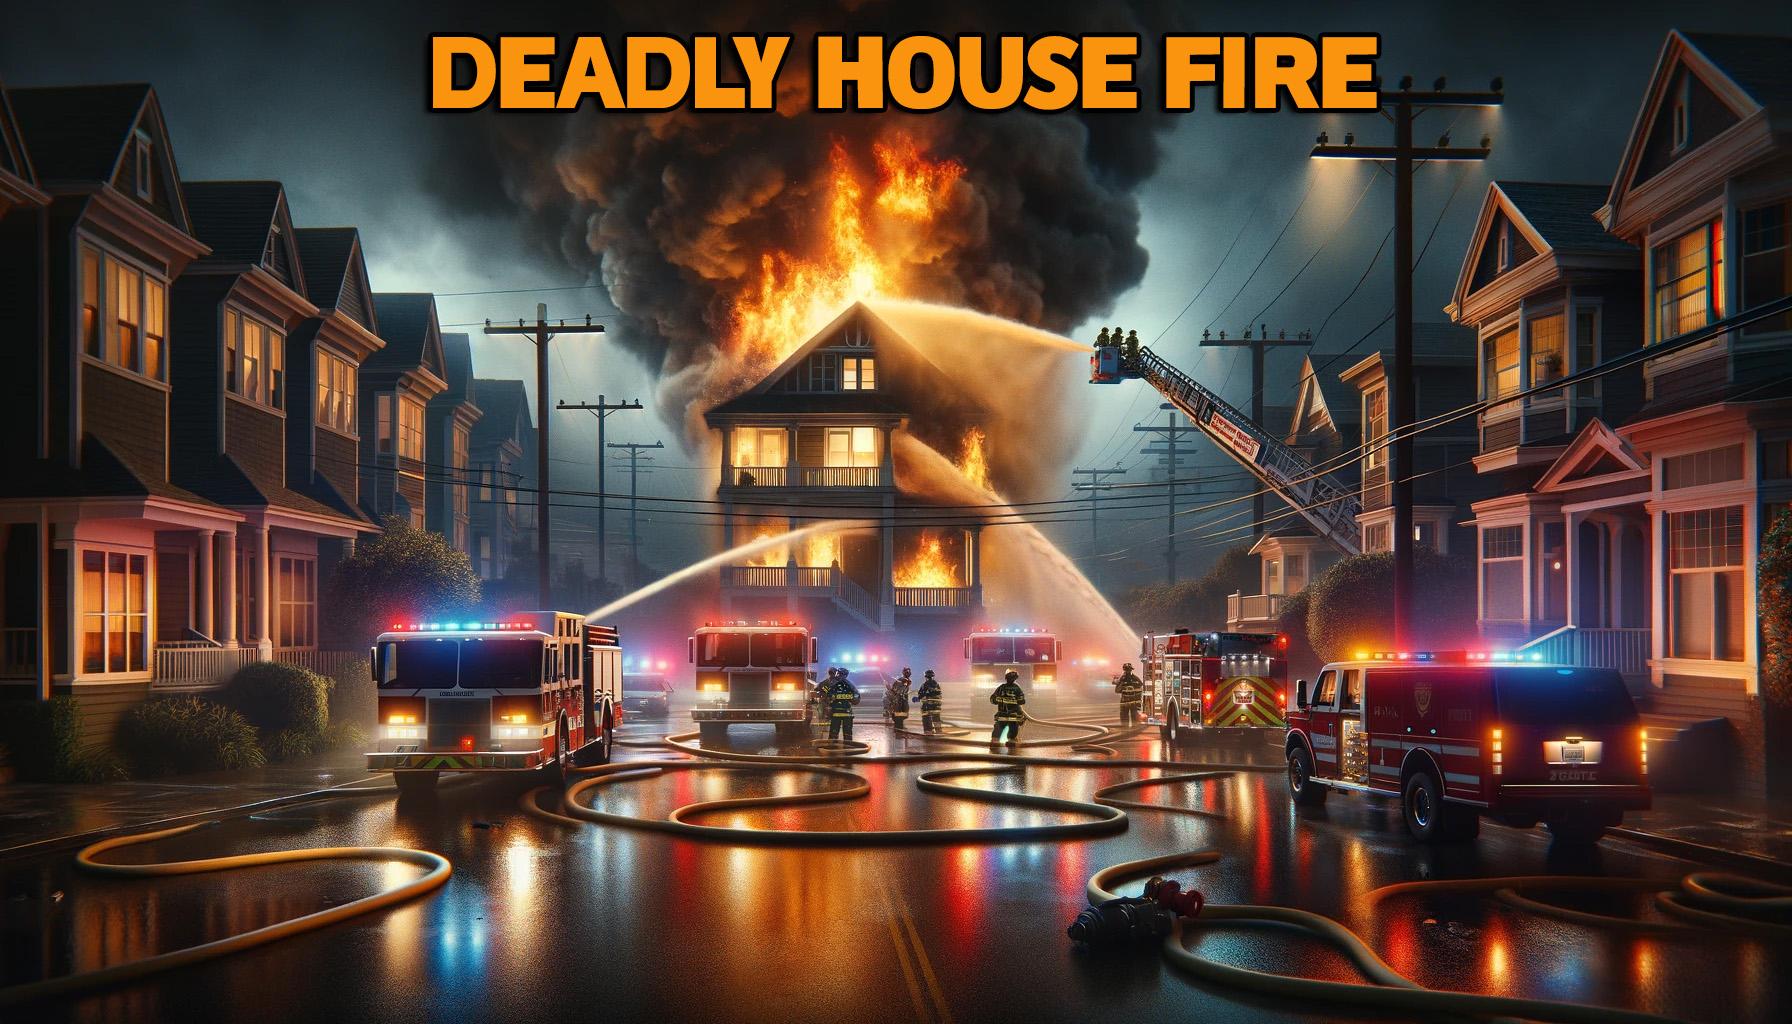 Deadly House FIre News Graphic